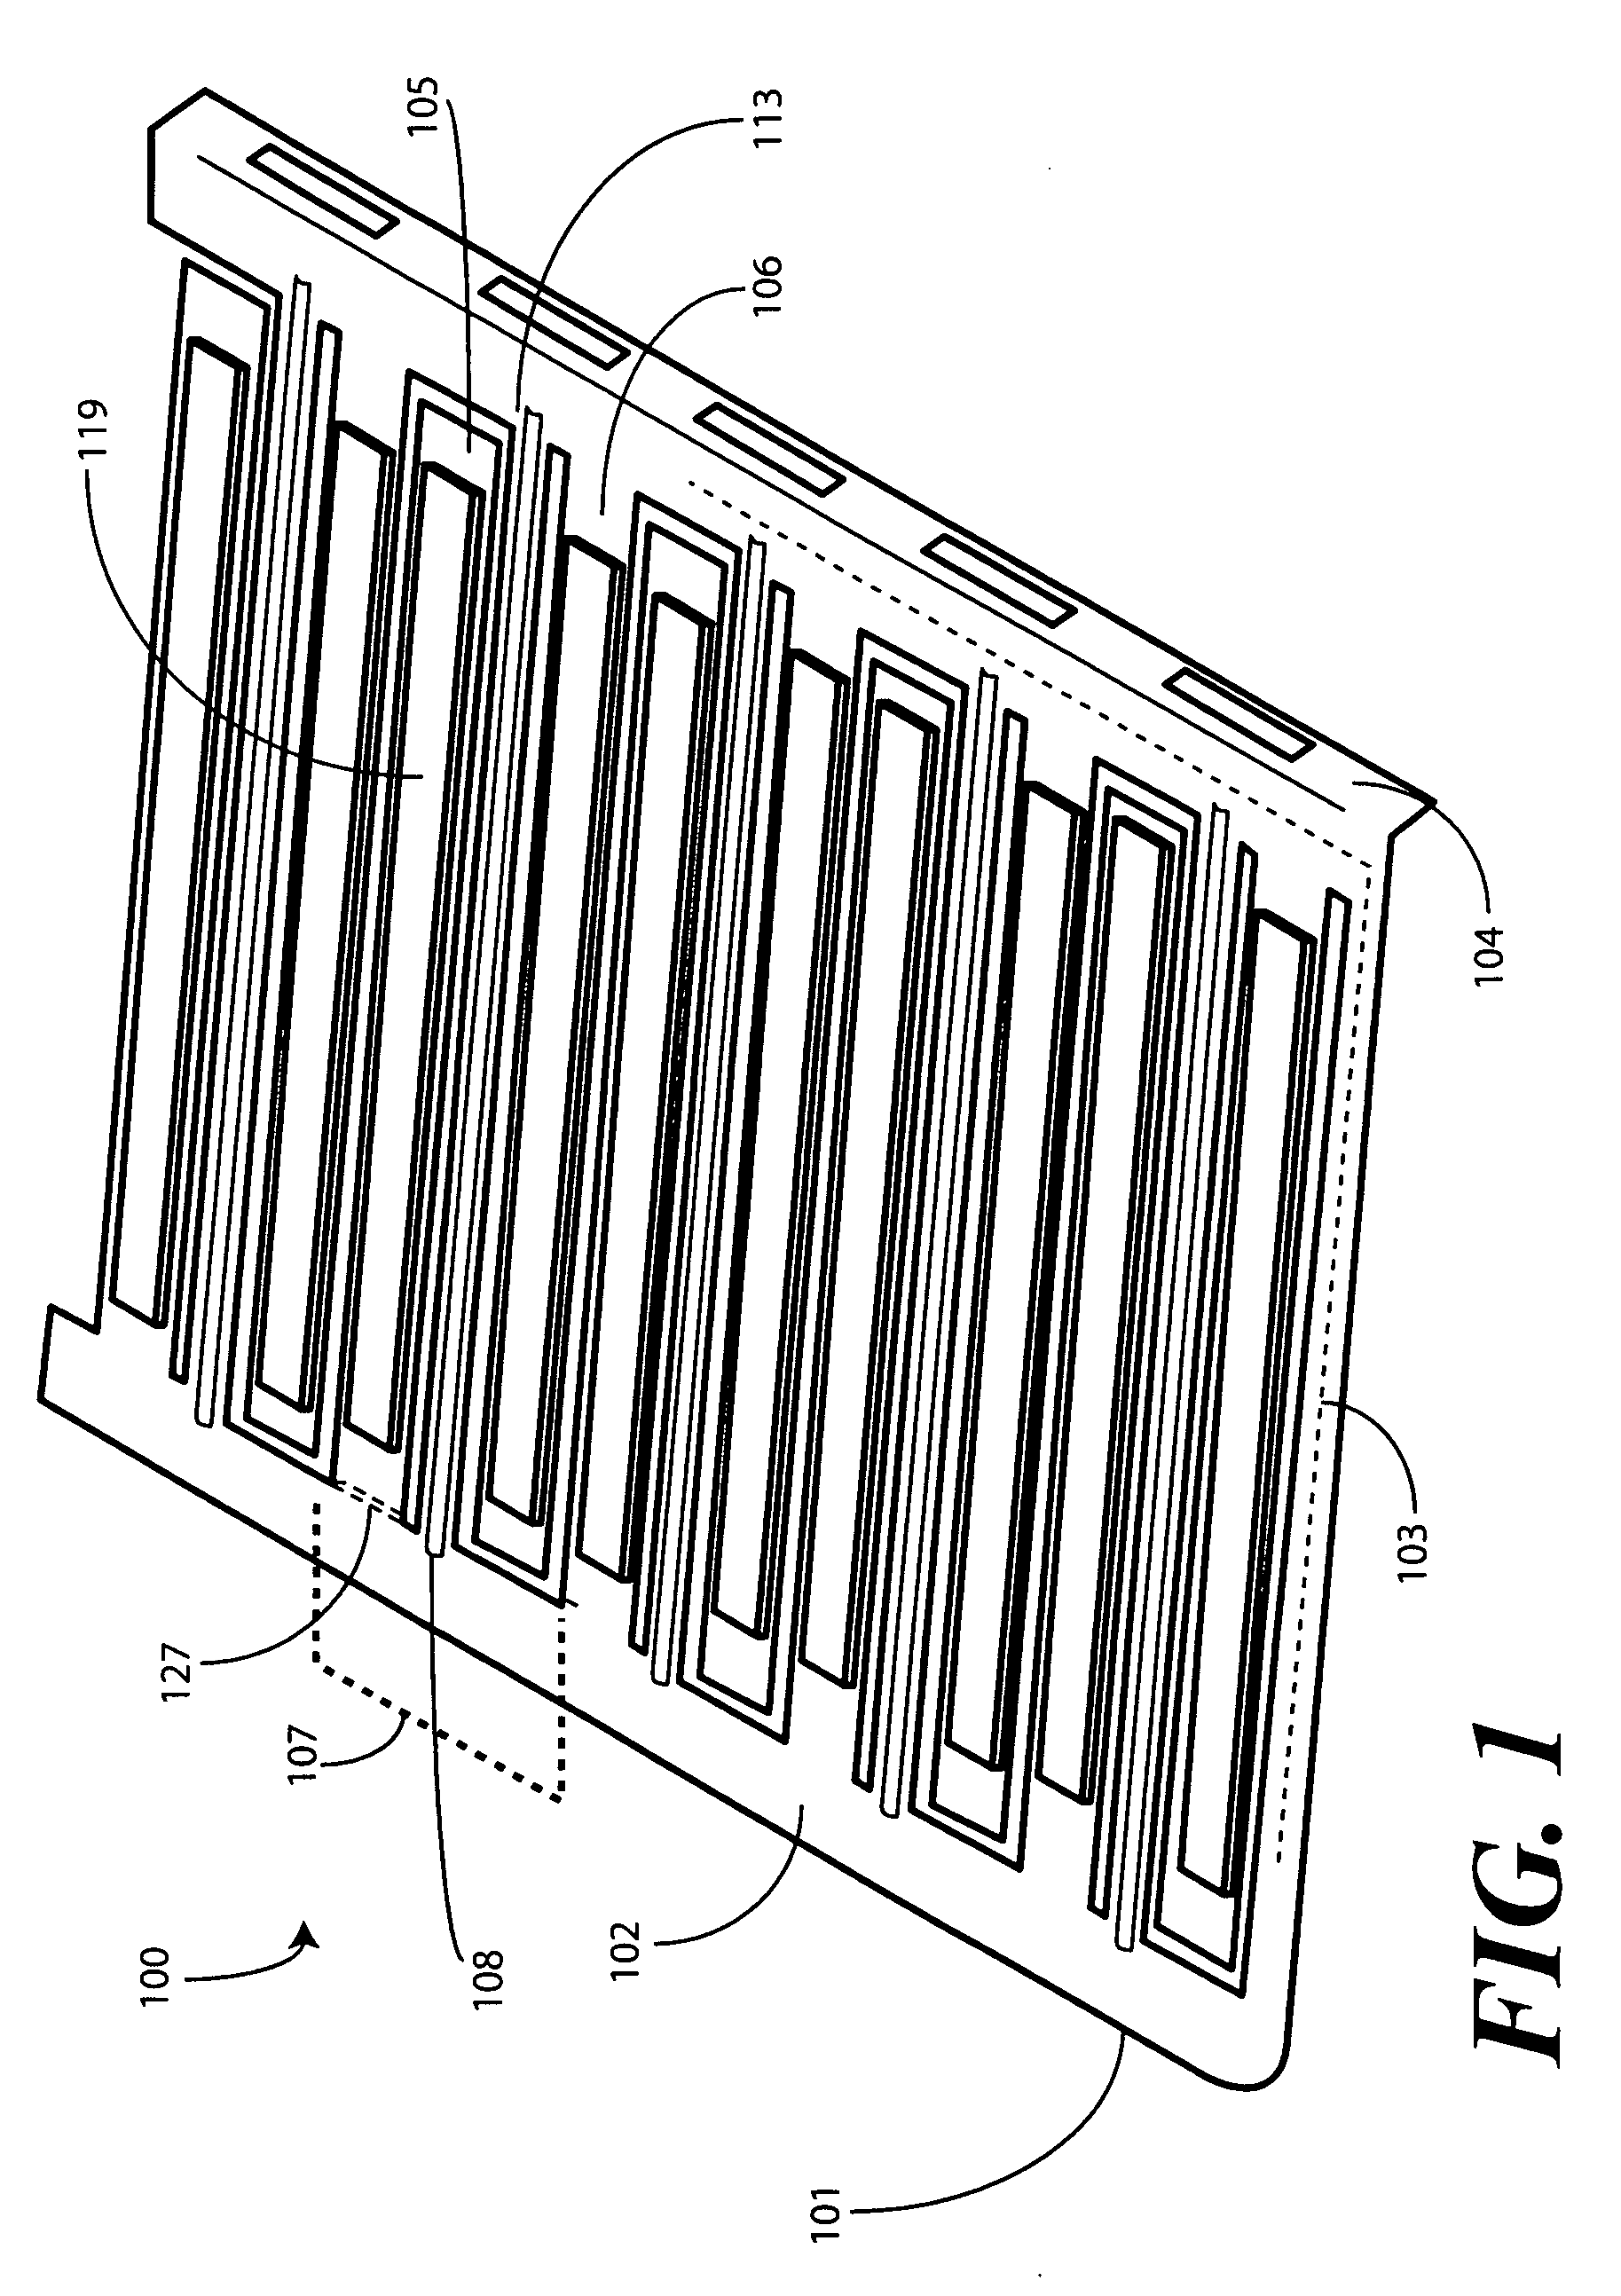 Haptic Response Apparatus for an Electronic Device